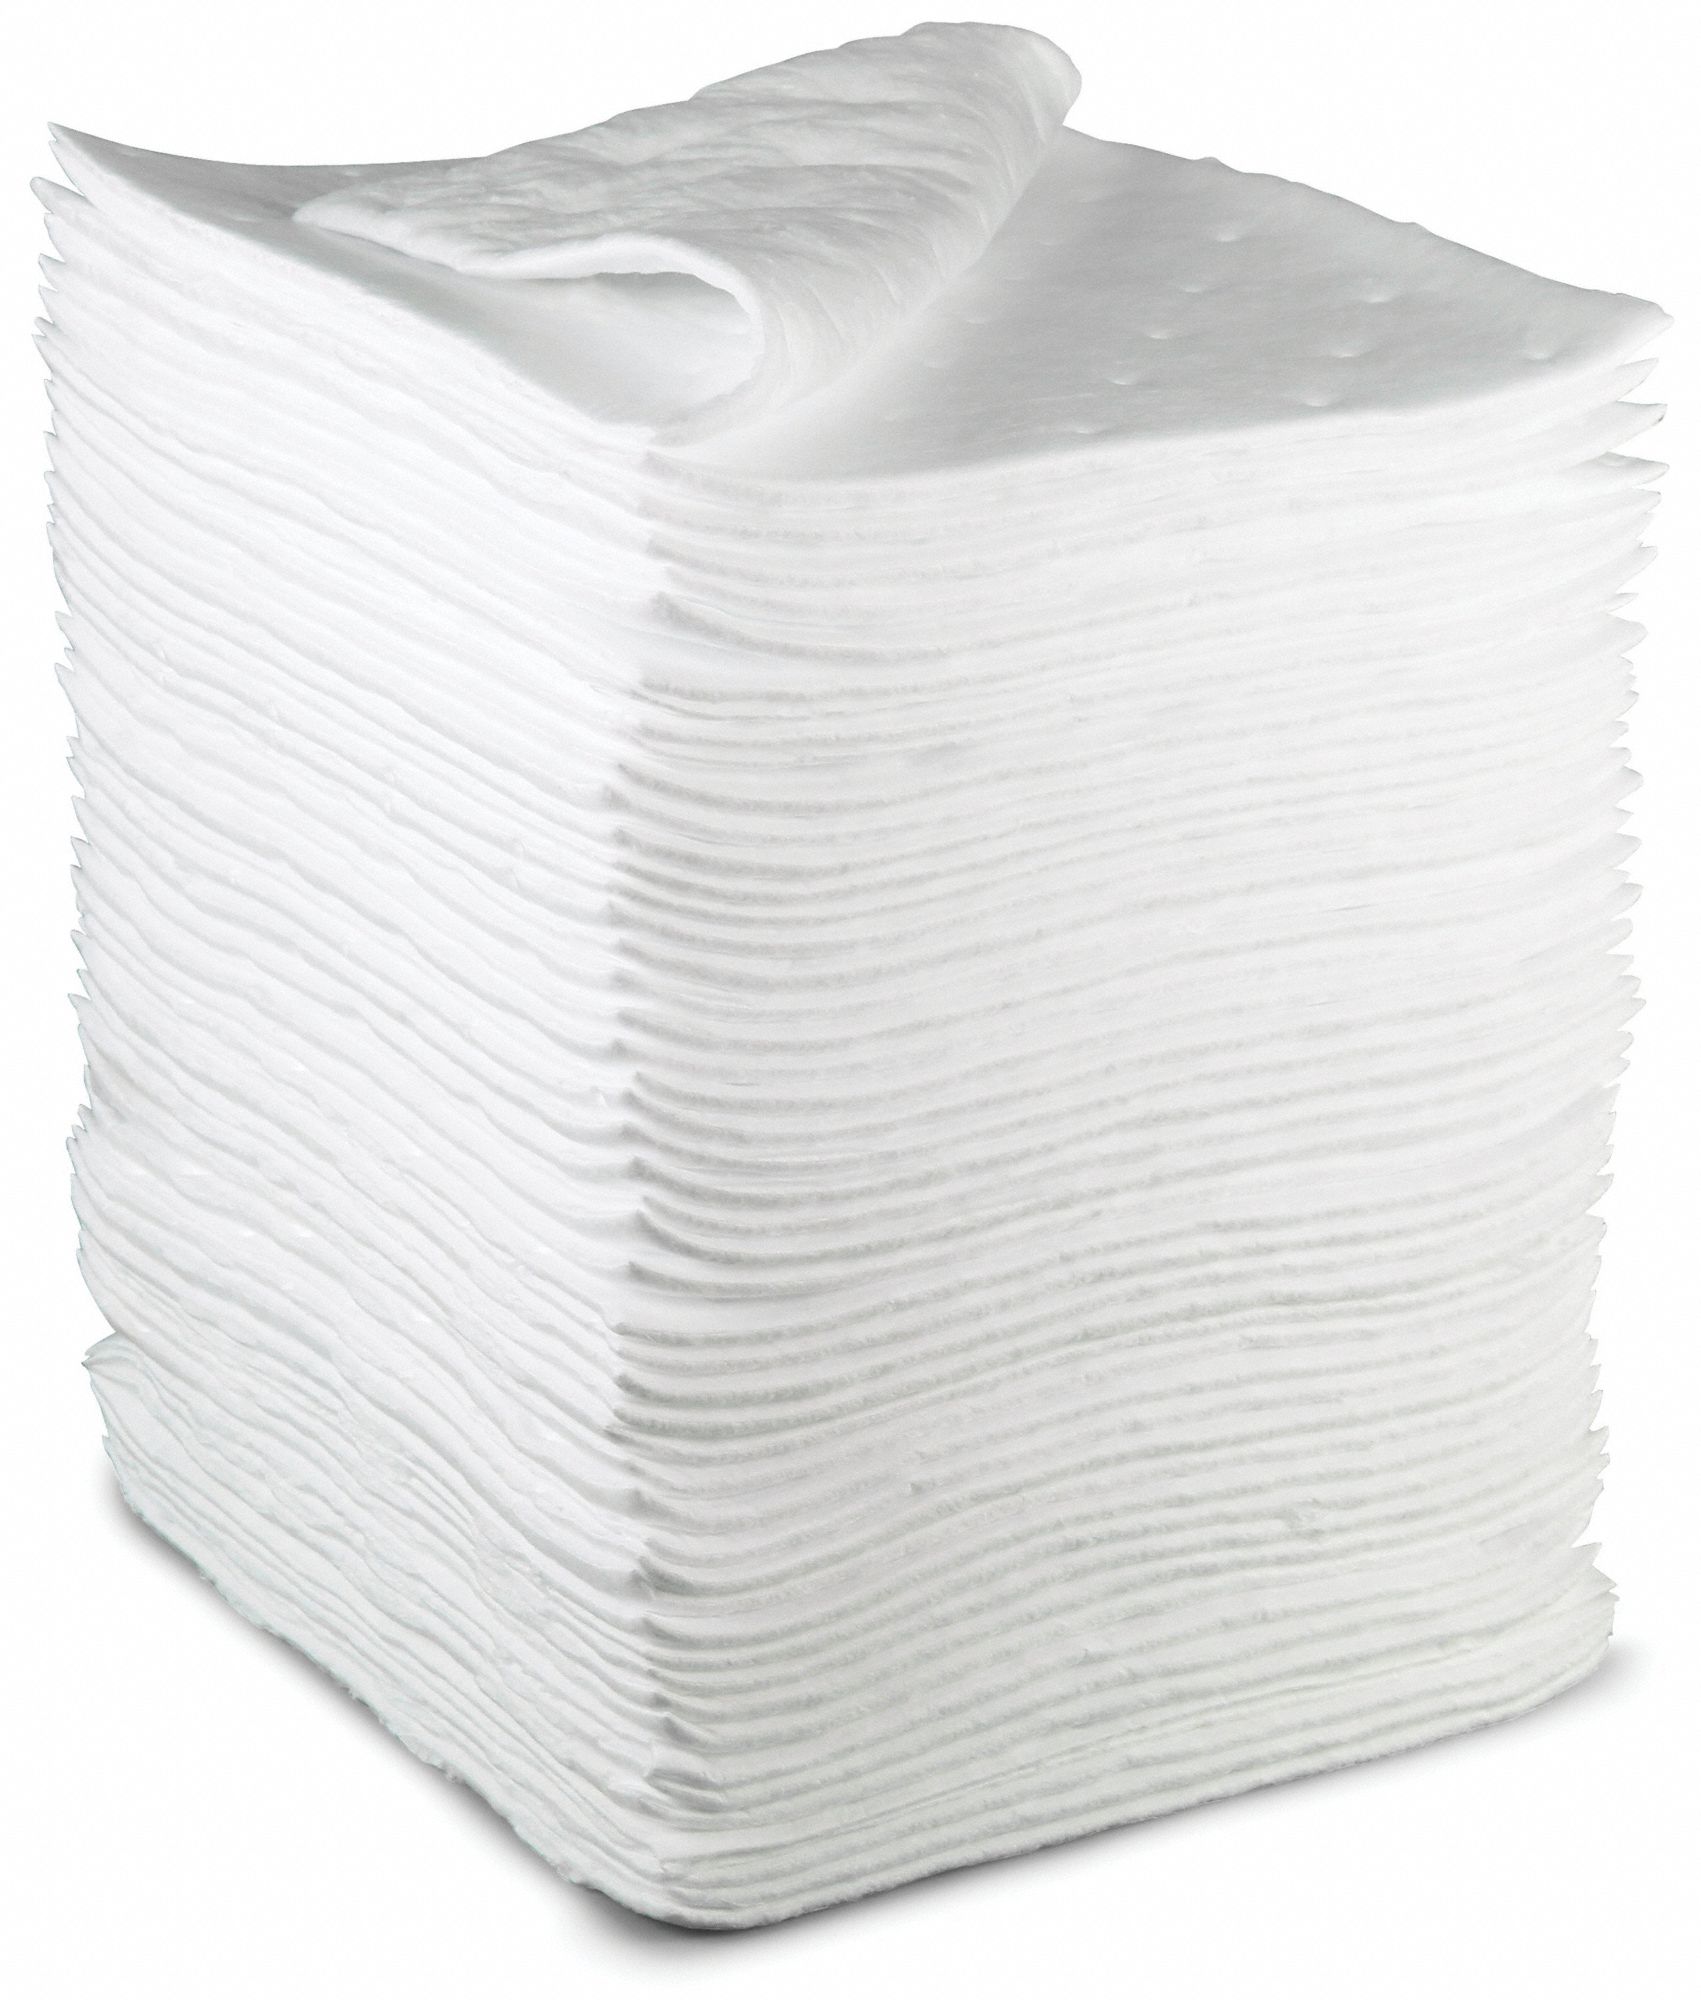 3M 19 in Absorbent Pad, Fluids Absorbed: Oil-Based Liquids, Heavy, 33 ...